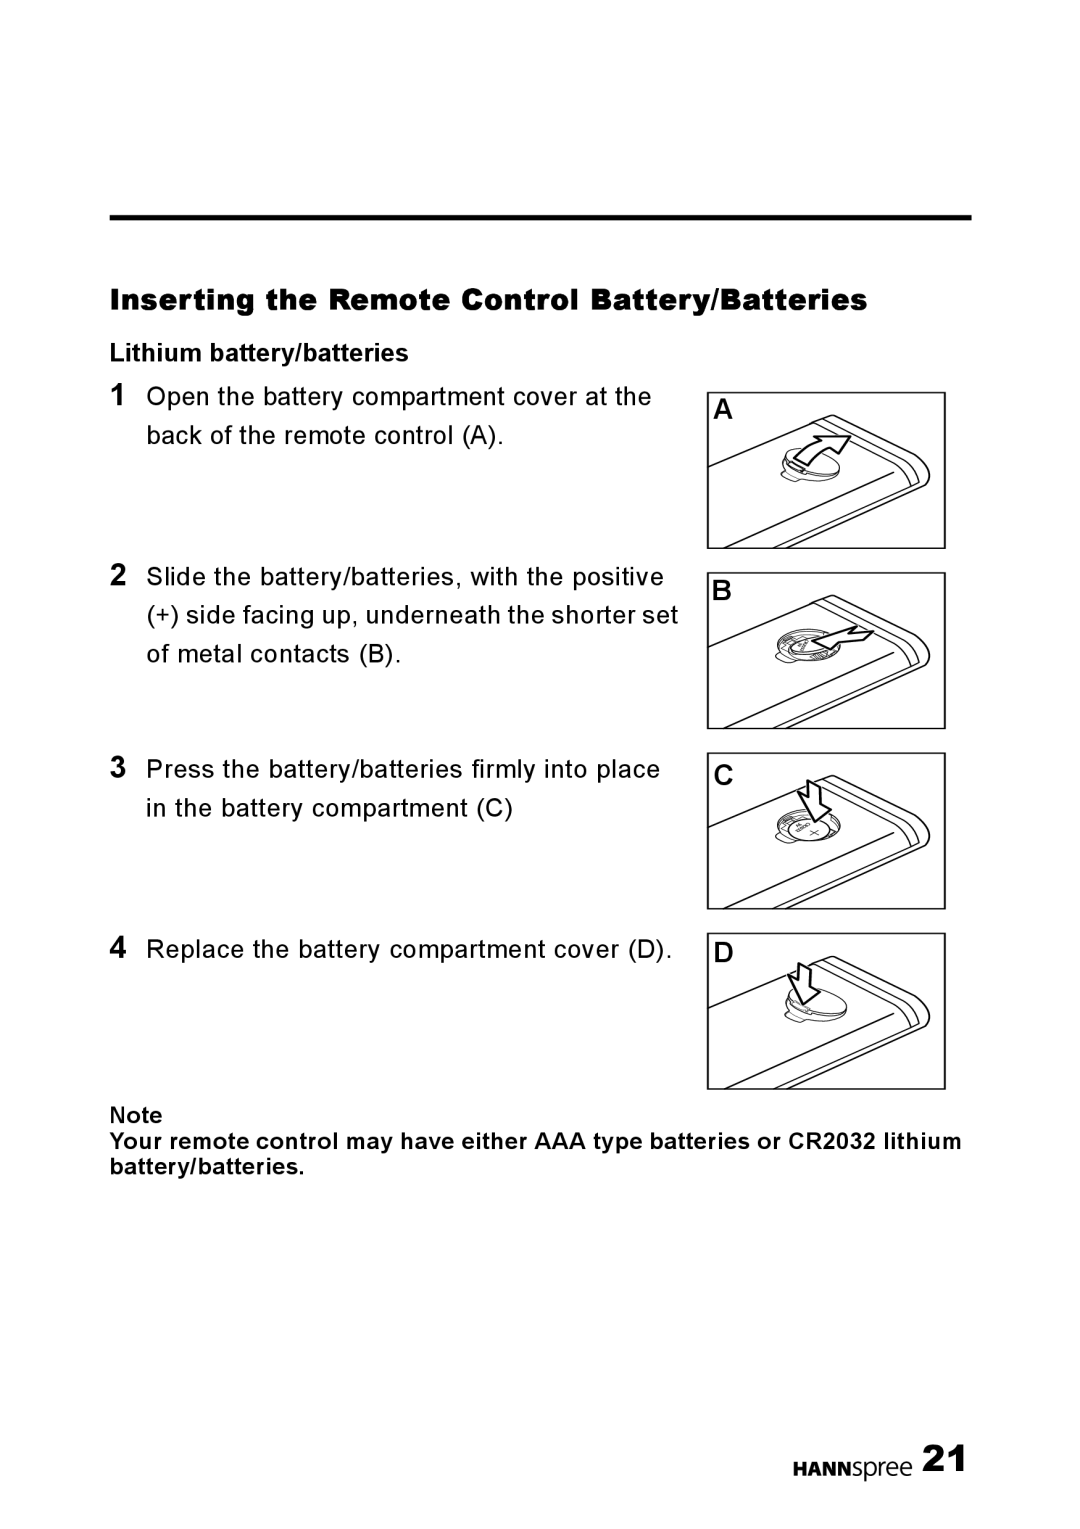 HANNspree HANNSz.crab user manual Inserting the Remote Control Battery/Batteries 